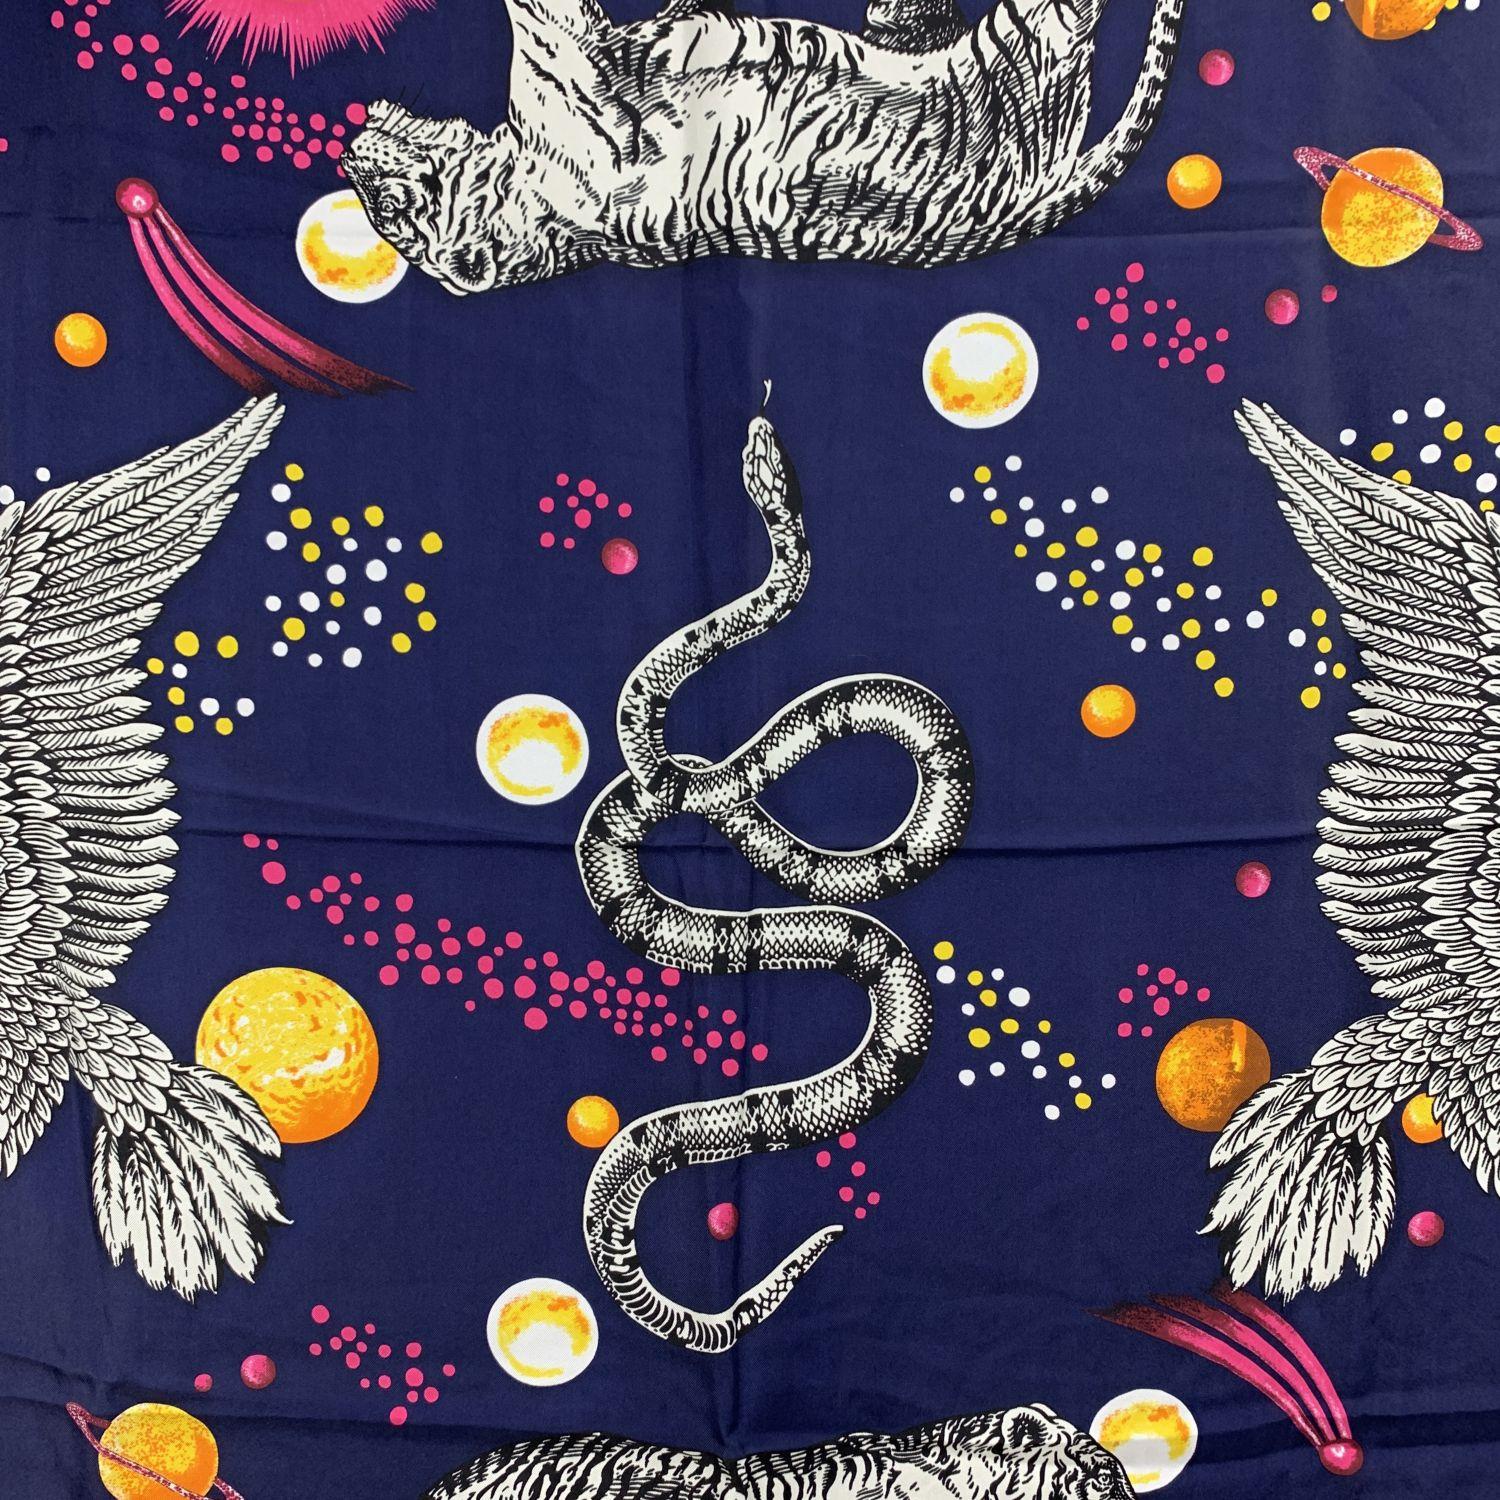 Gucci 'Space Animals' silk scarf. Black space background with tigers, eagles and snake designs.Composition: 100% Silk. Frayed edges. Measurements: 35.5 x 35.5 inches - 90 x 90 cm. Made in Italy


Details

MATERIAL: Silk

COLOR: Black

MODEL: Space